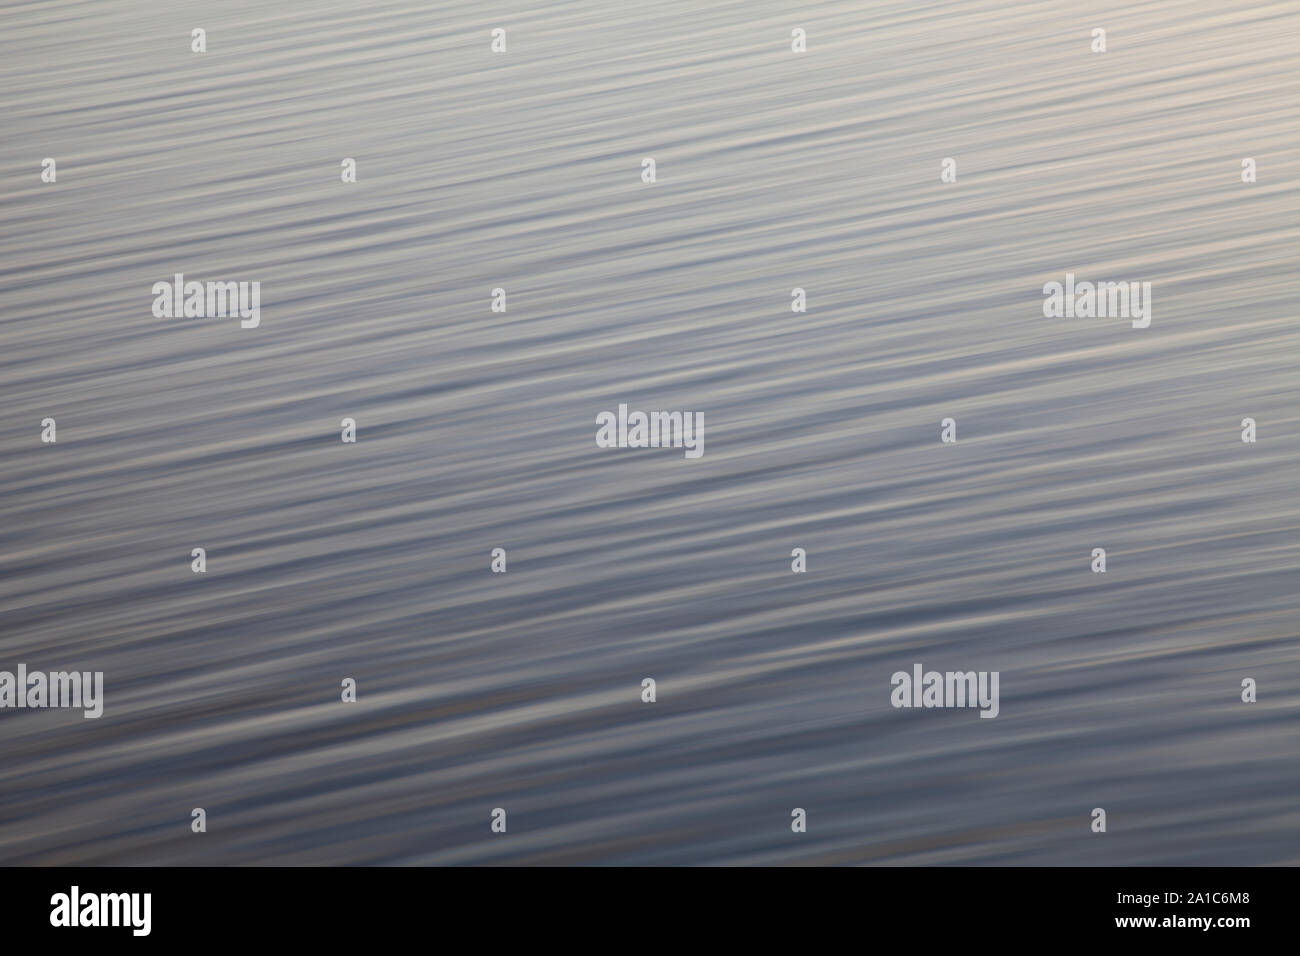 Blue to green gradient stripped wallpaper or background resembling a surface of water Stock Photo